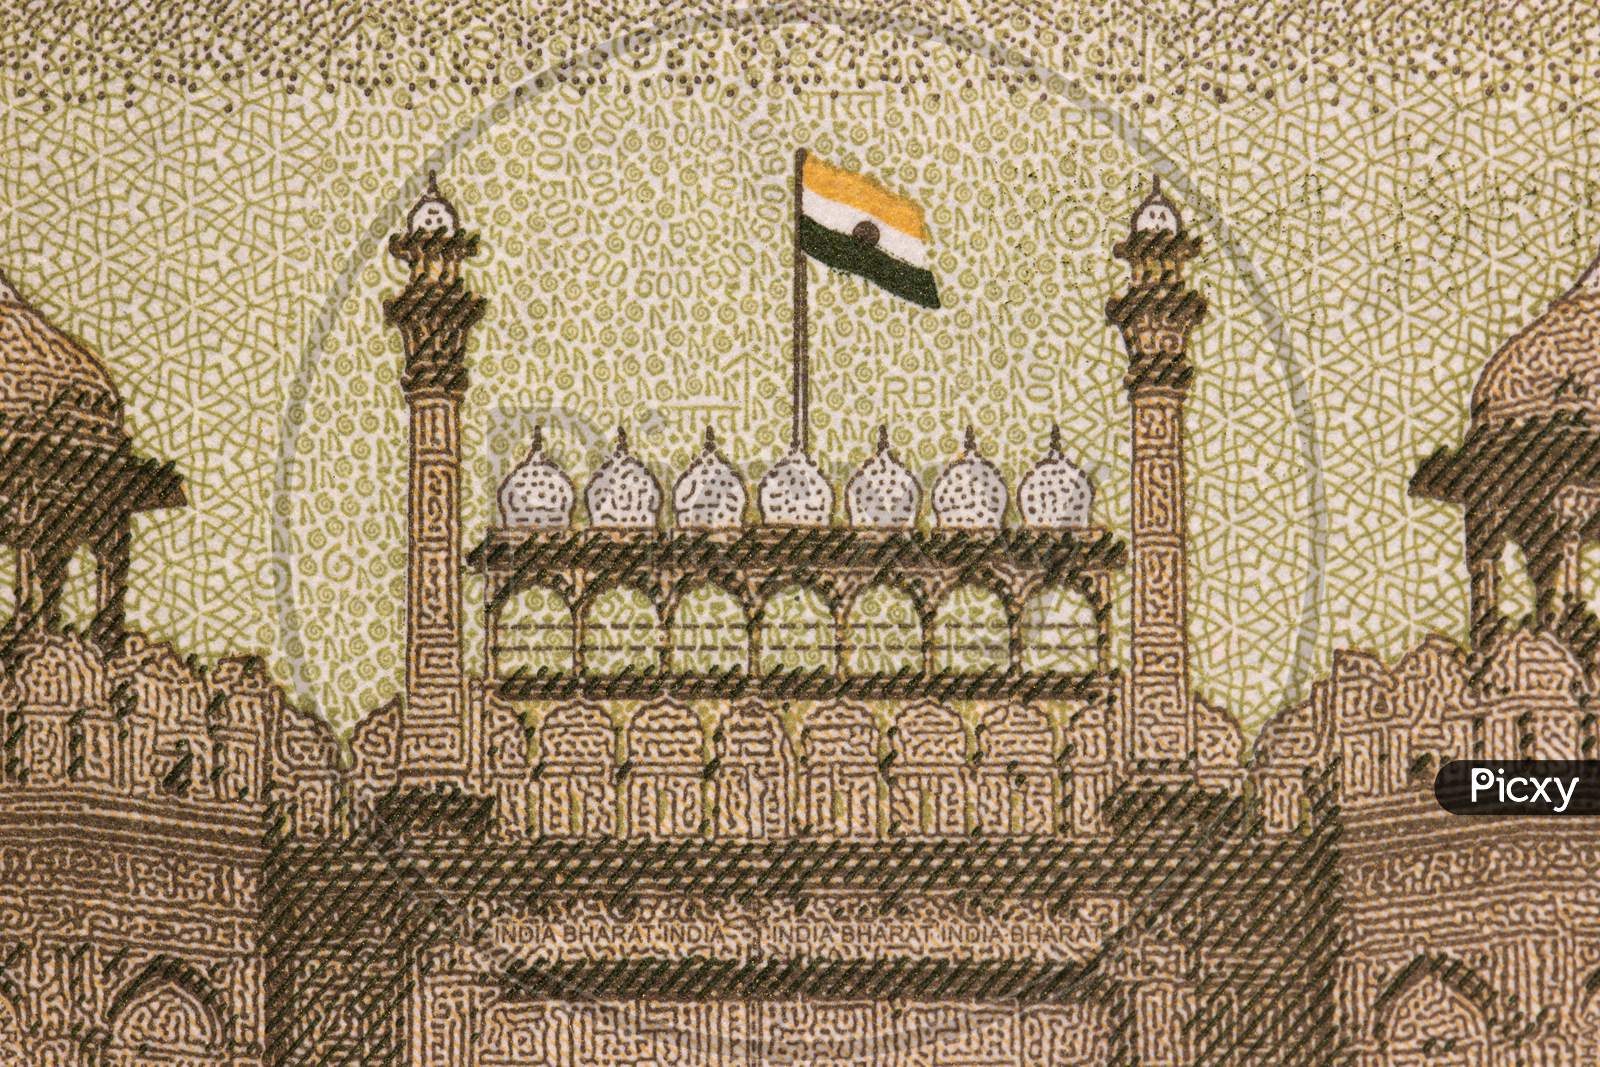 Indian 500 Rupee Note Close Up displaying red fort and flag